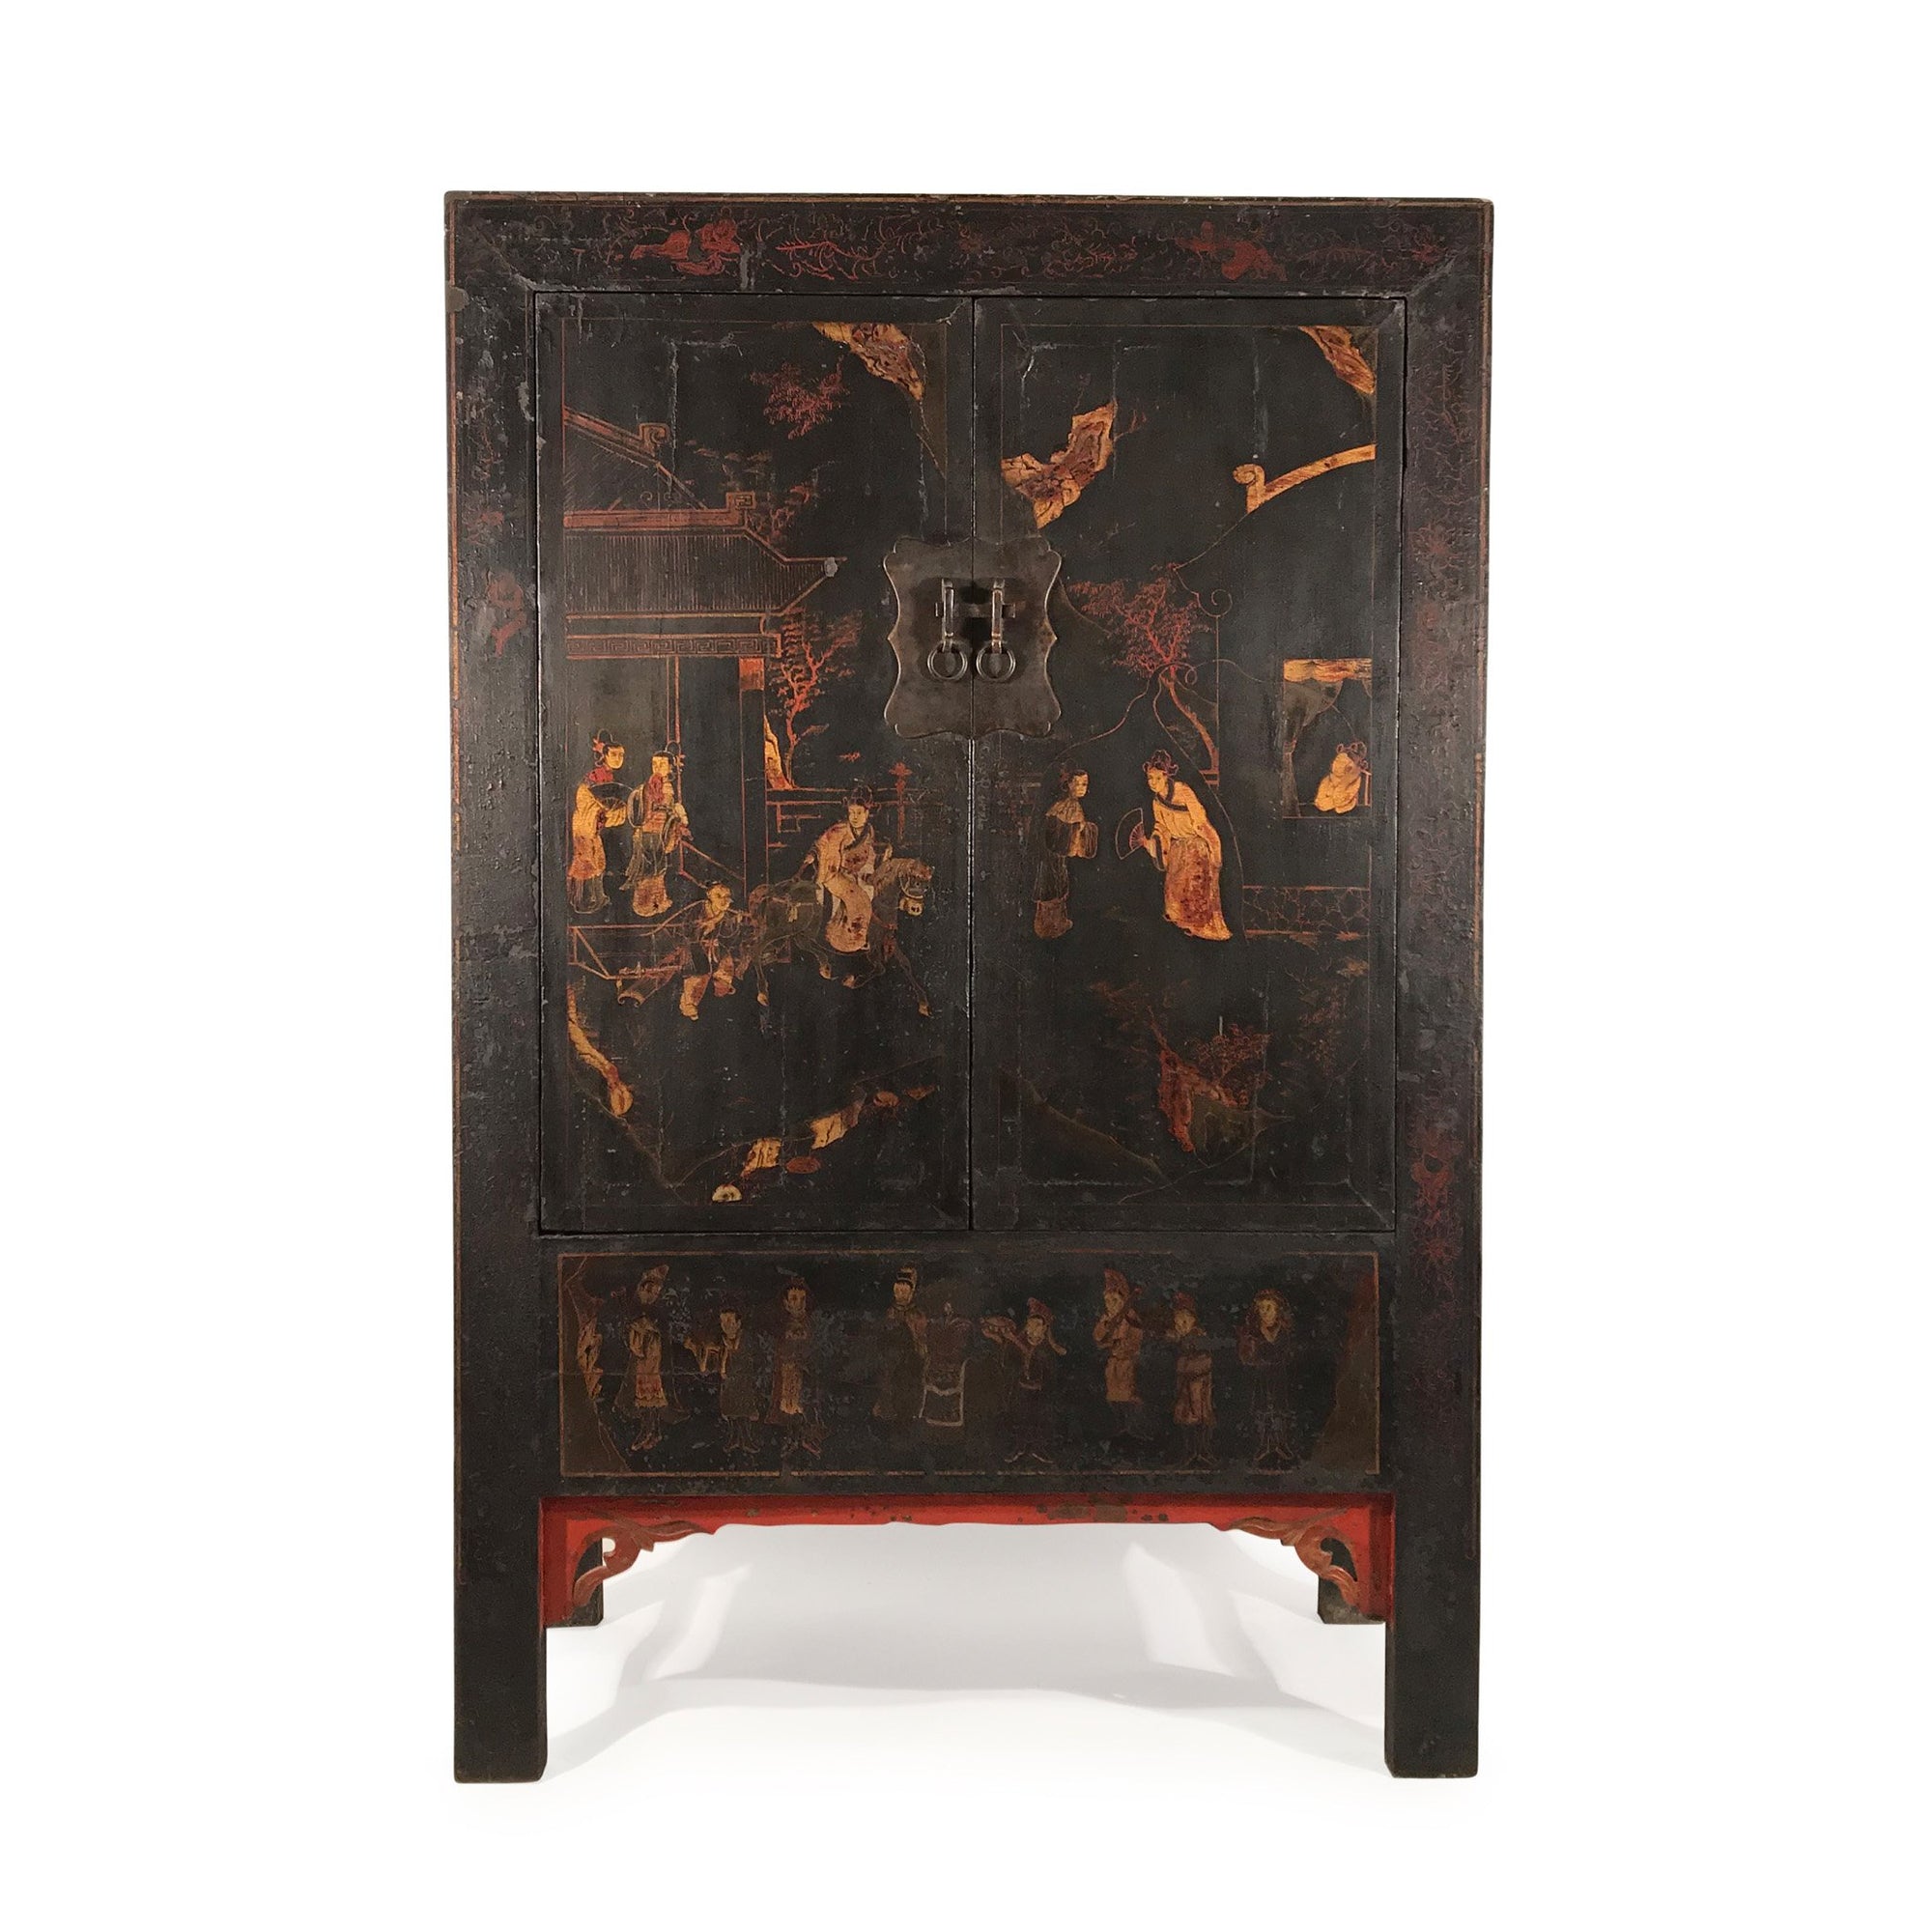 Black Lacquer Wedding Cabinet from Shanxi Province -19thC - 120 x 57 x 183 (wxdxh cms) - C1406